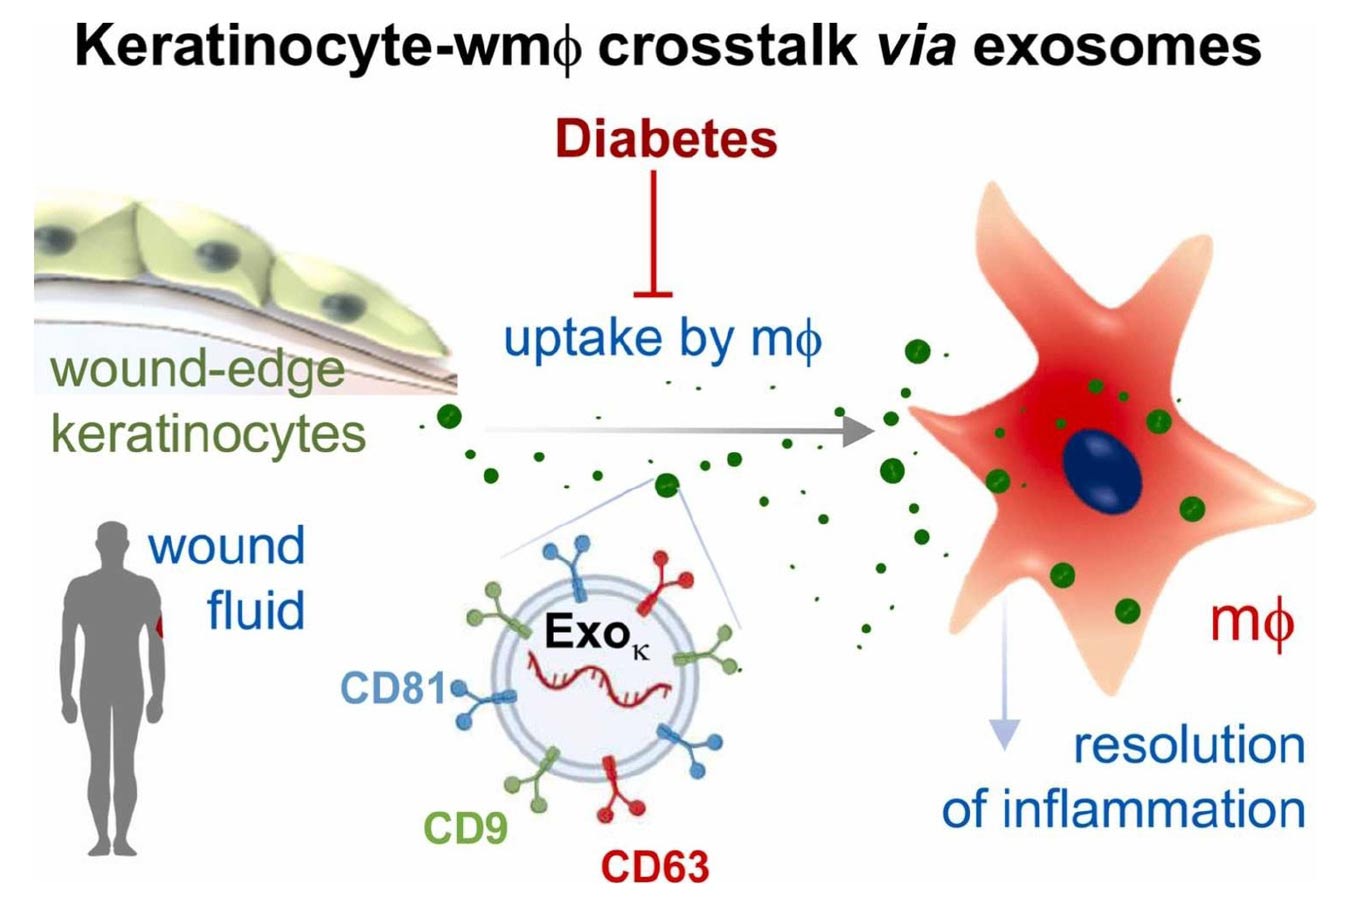 Dysfunctional Exosomes Involved in Chronic Inflammation in Diabetic Wounds